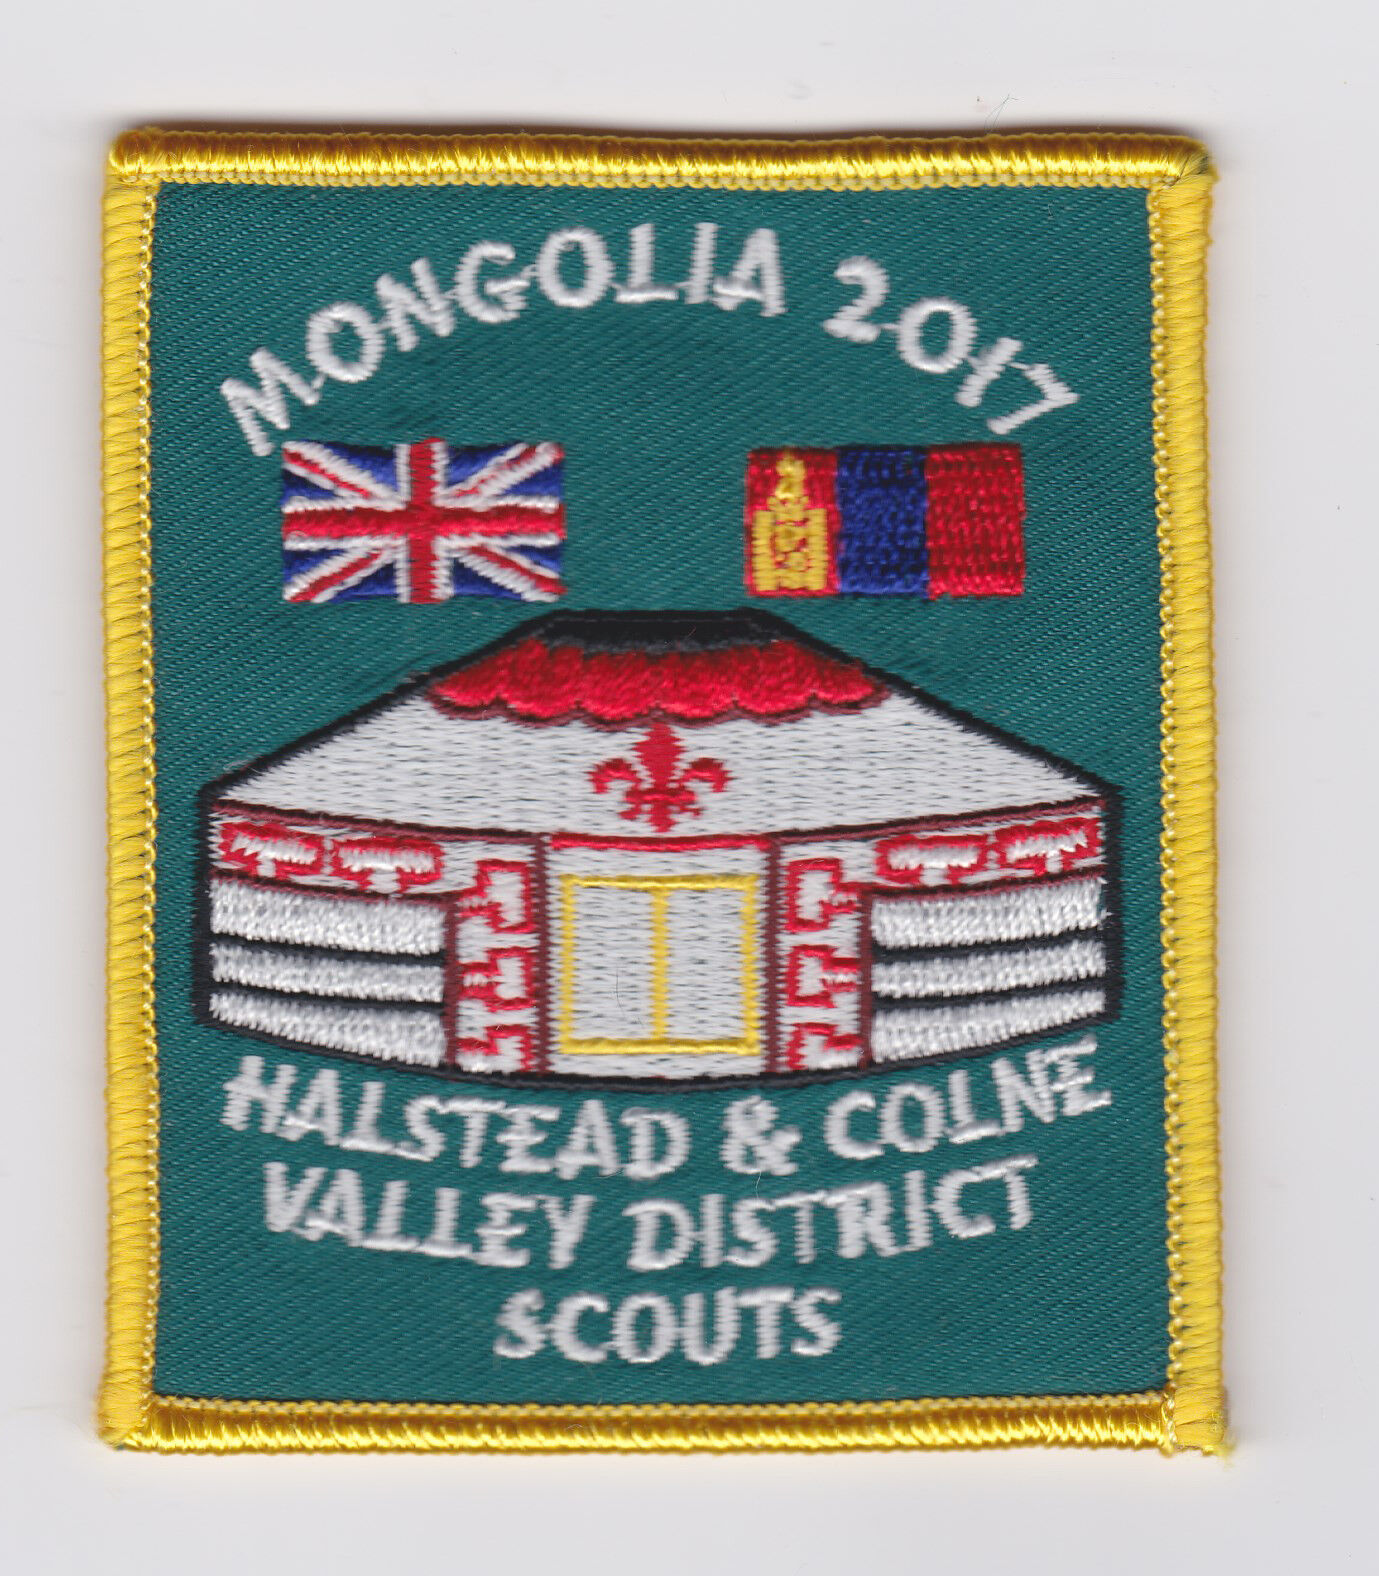 UK ESSEX HALSTEAD & COLNE VALLEY SCOUTS - 2017 MONGOLIA EXPEDITION SCOUT PATCH